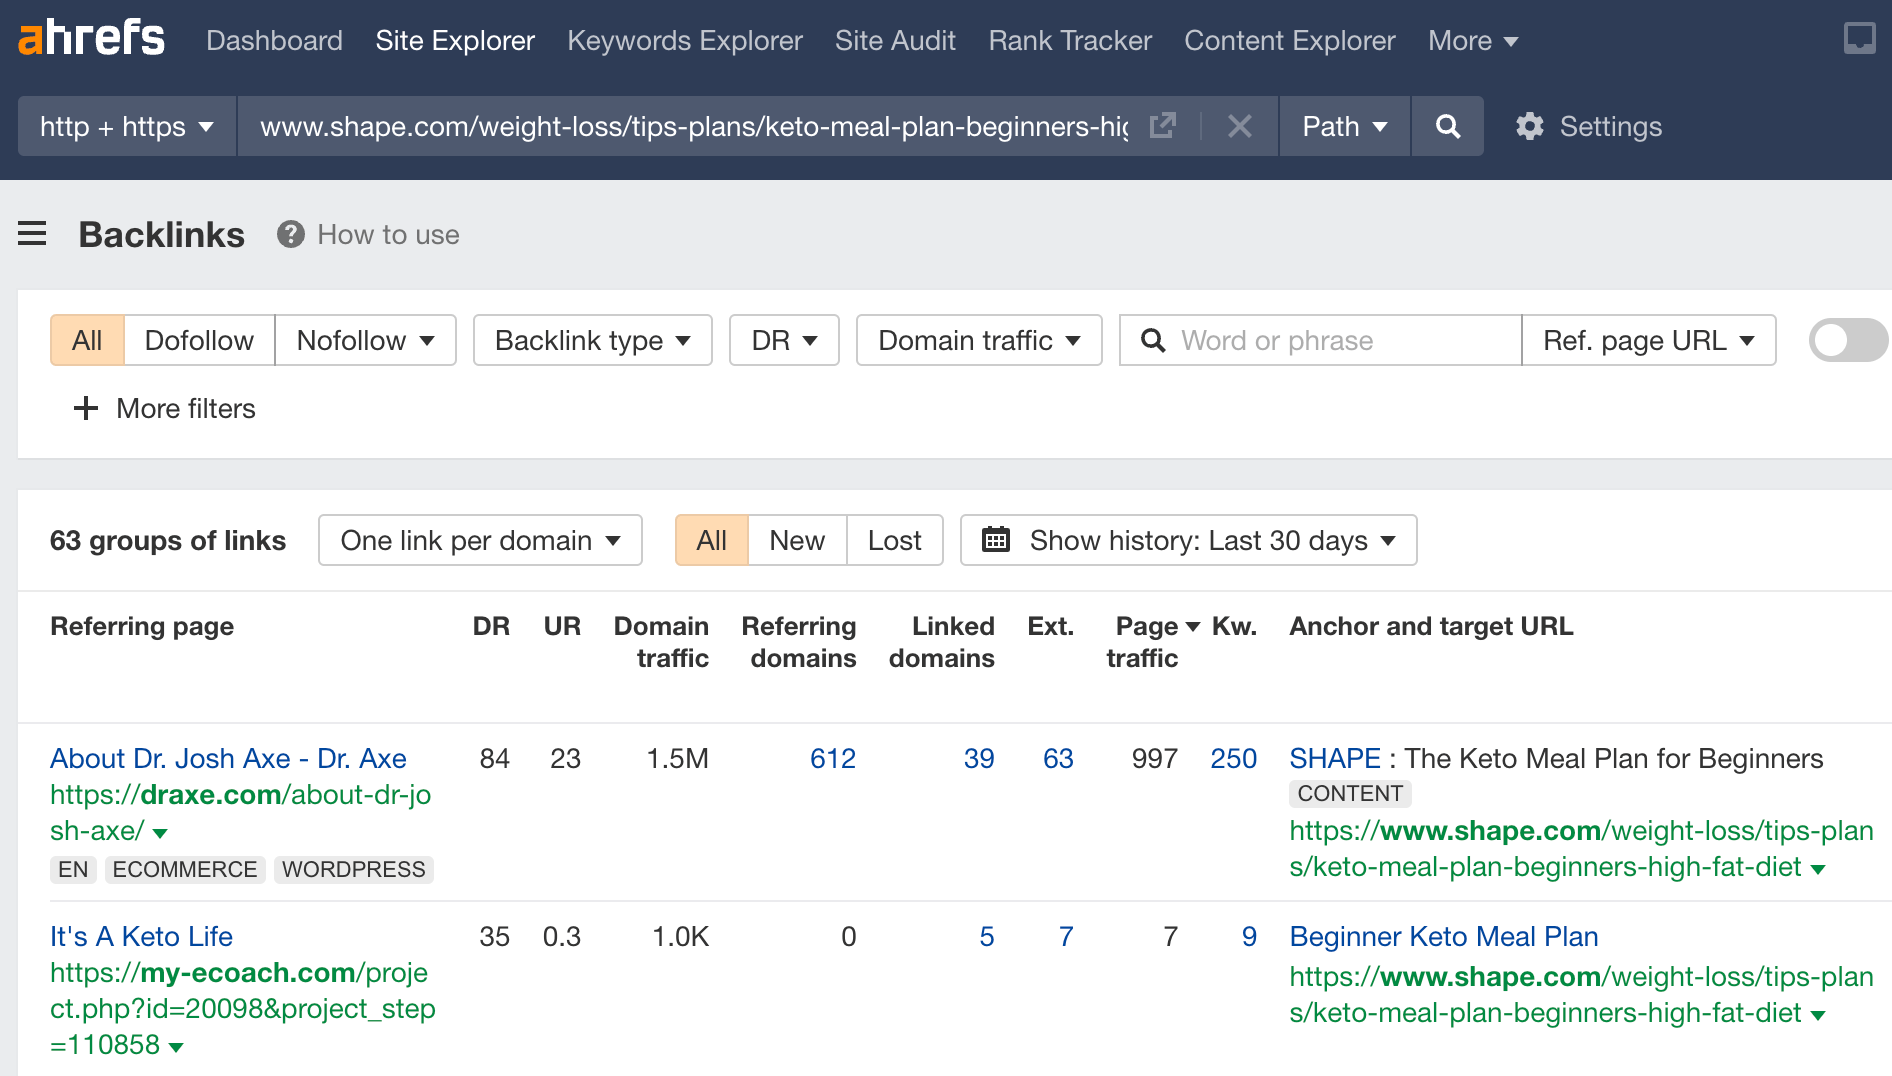 Checking the backlink profile of the dead page, via Ahrefs' Site Explorer
